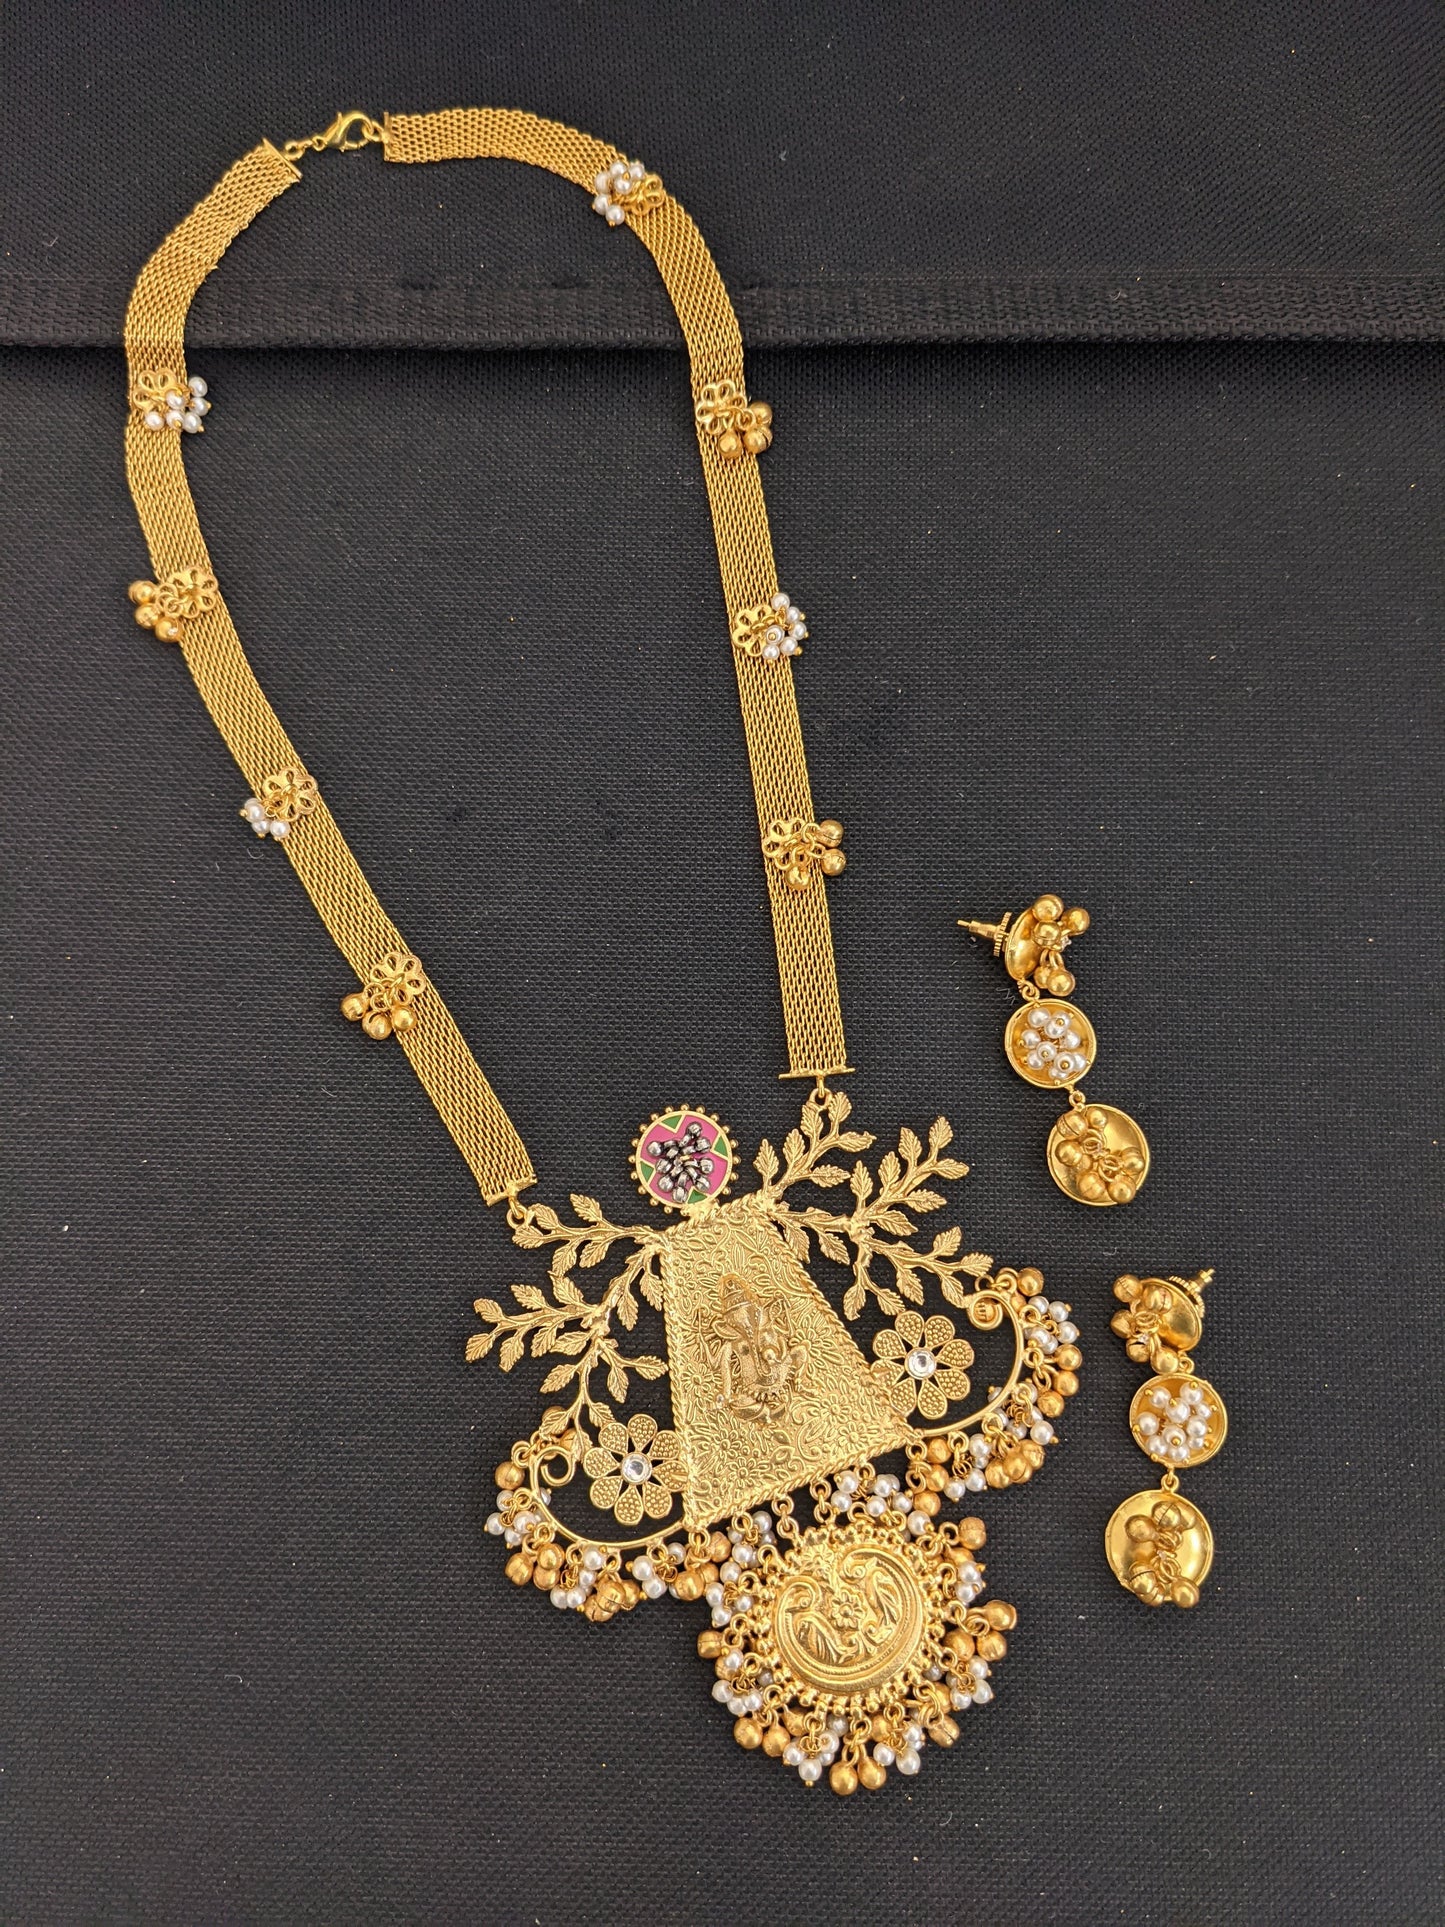 Contemporary Ganesh ji Pendant Necklace and Earrings set